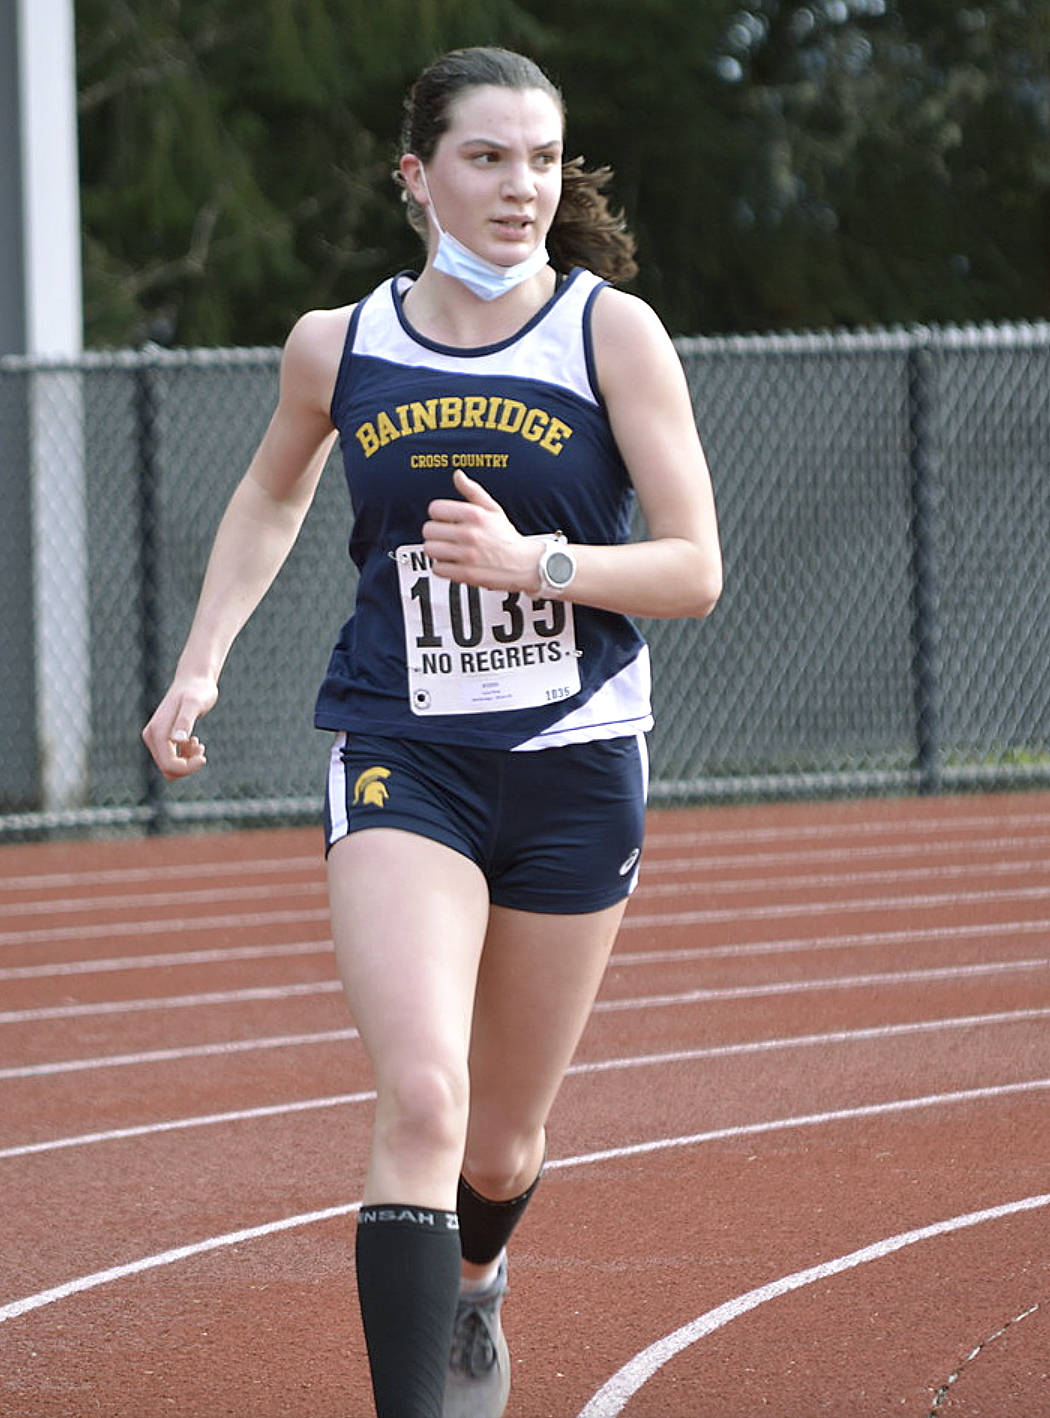 Lucy King makes her way down the track in a dual-meet with Central Kitsap. King finished second in her race behind teammate Eden Michael. (Photo courtesy of Rick Peters).